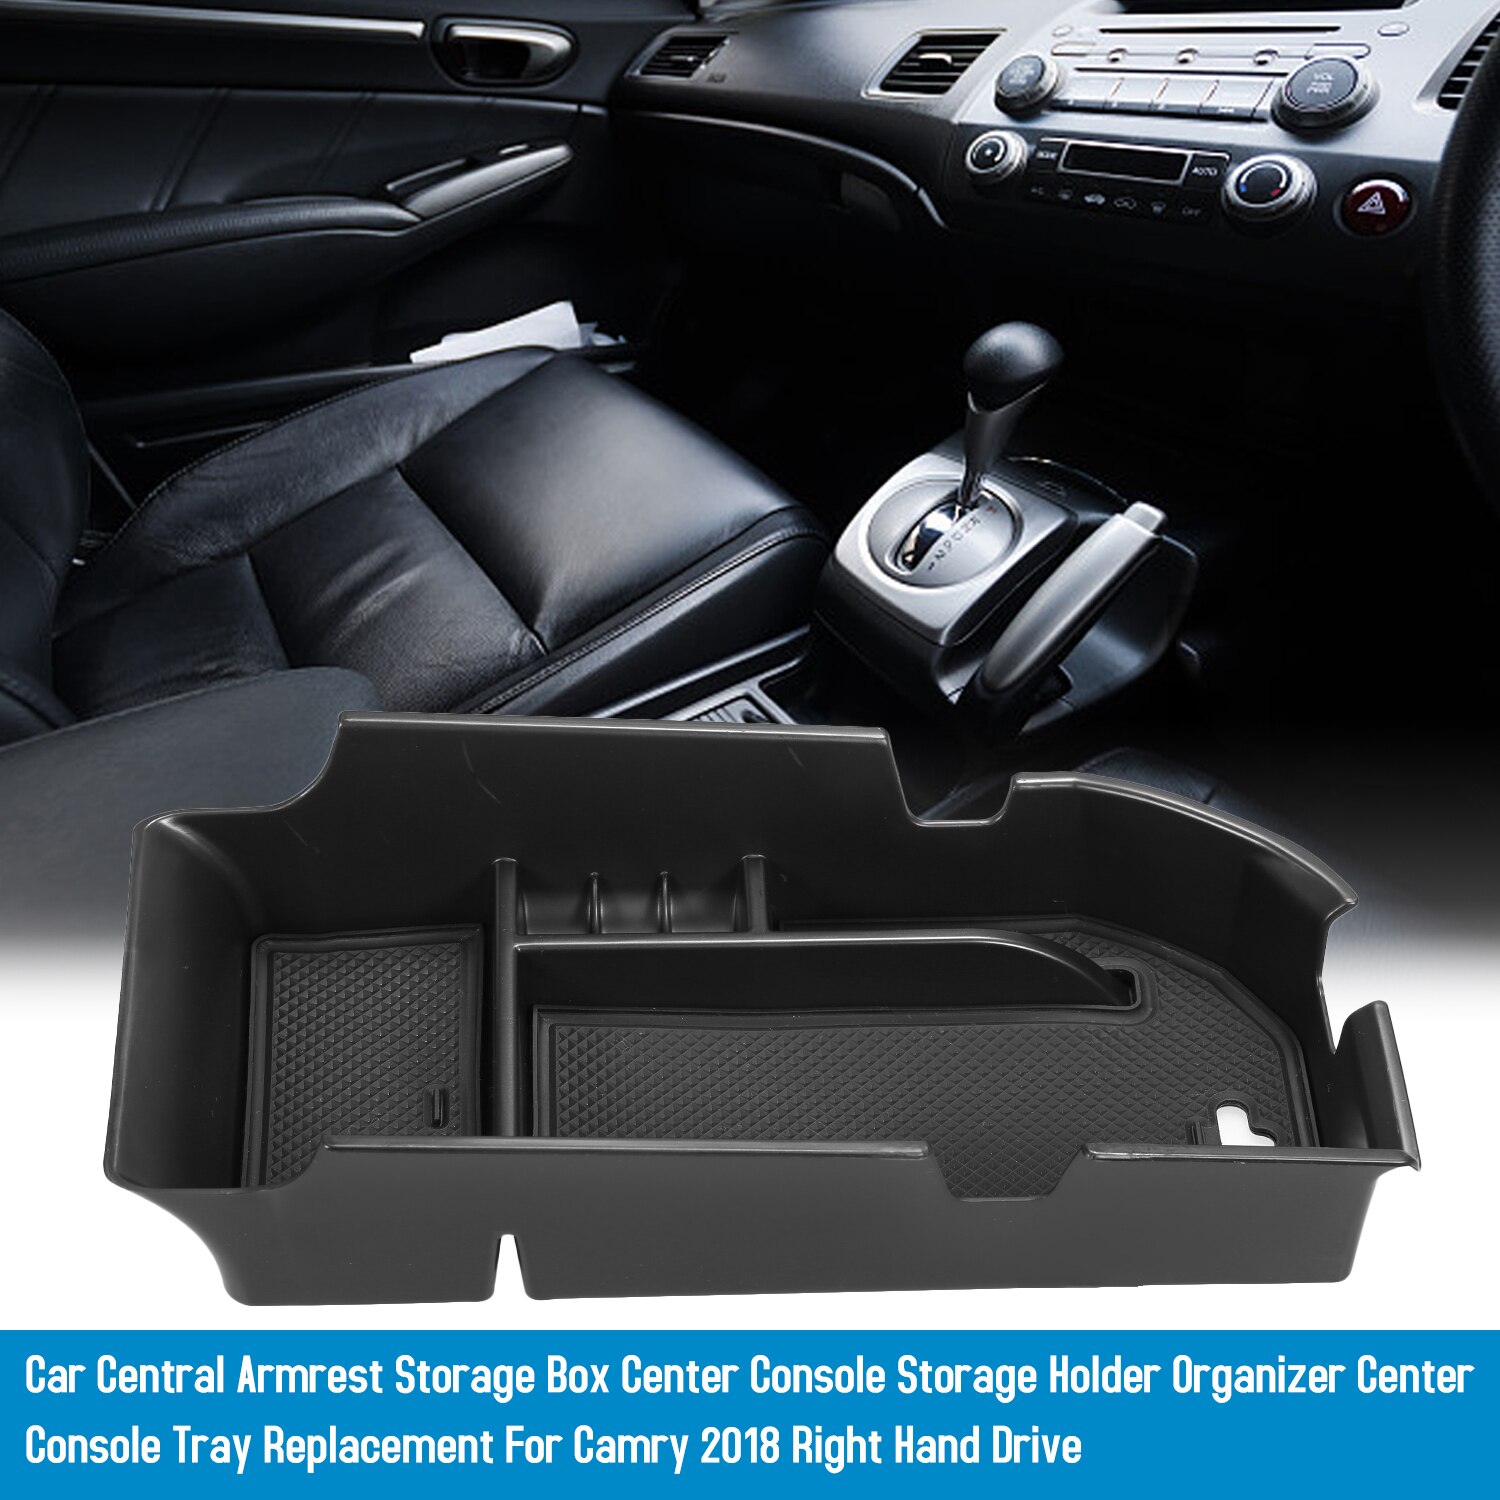 Auto Centrale Armsteun Opbergdoos Center Console Houder Organizer Center Console Tray Vervanging Voor Camry Right Hand Drive